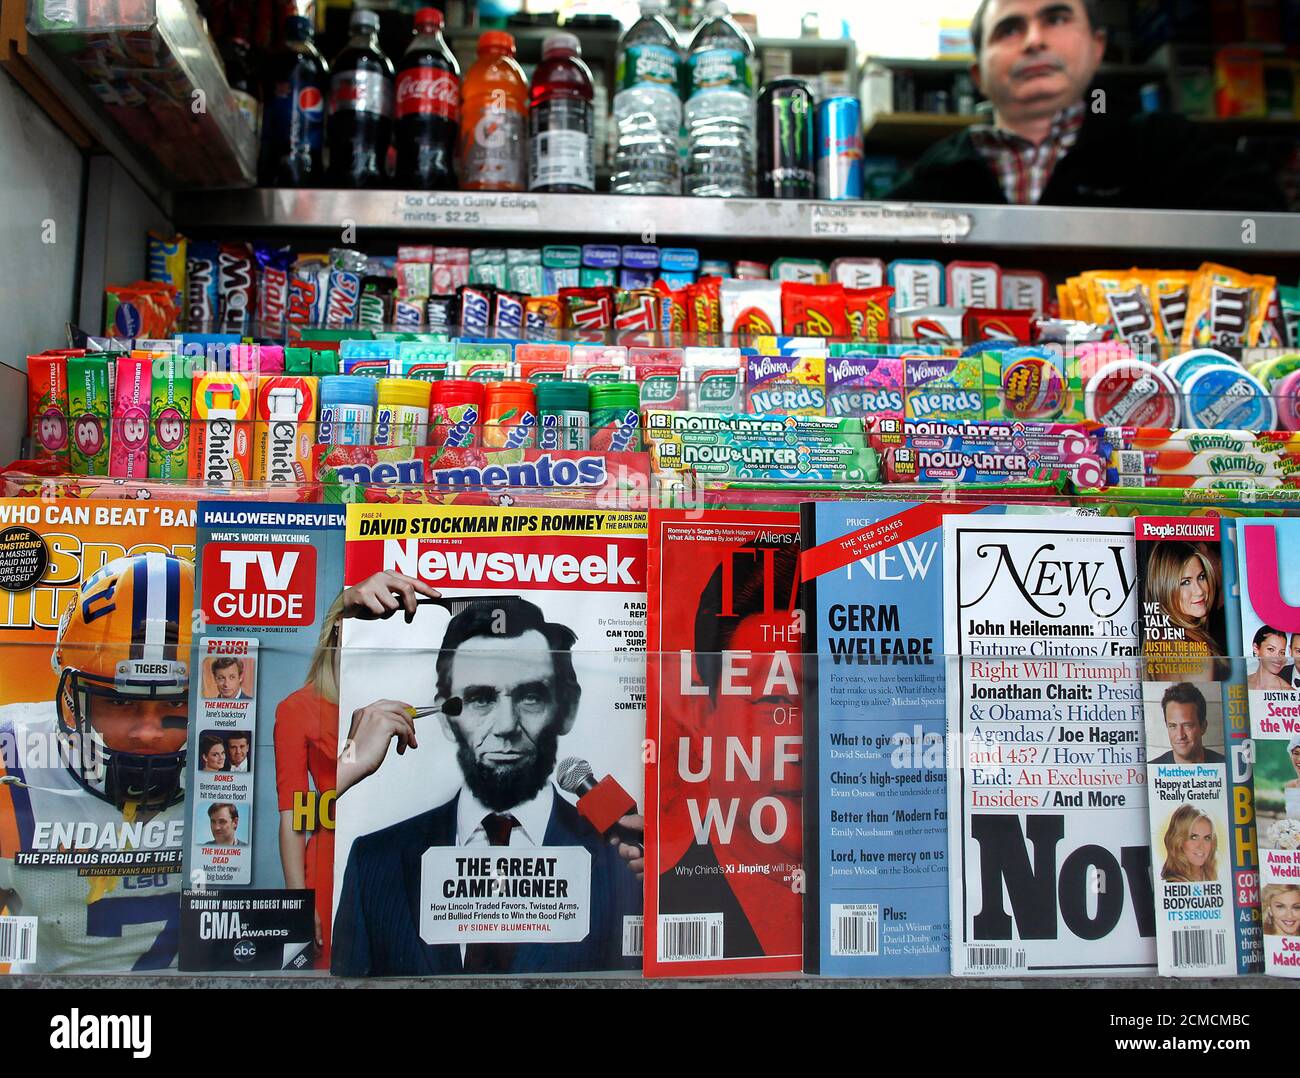 A copy of Newsweek magazine sits on a newsstand in New York October 18, 2012. Newsweek, the venerable U.S. weekly magazine covering current events, will publish its final print edition on Dec. 31 and move to an all-digital format early next year, two top executives said on Thursday. REUTERS/Carlo Allegri (UNITED STATES - Tags: MEDIA BUSINESS) Stock Photo